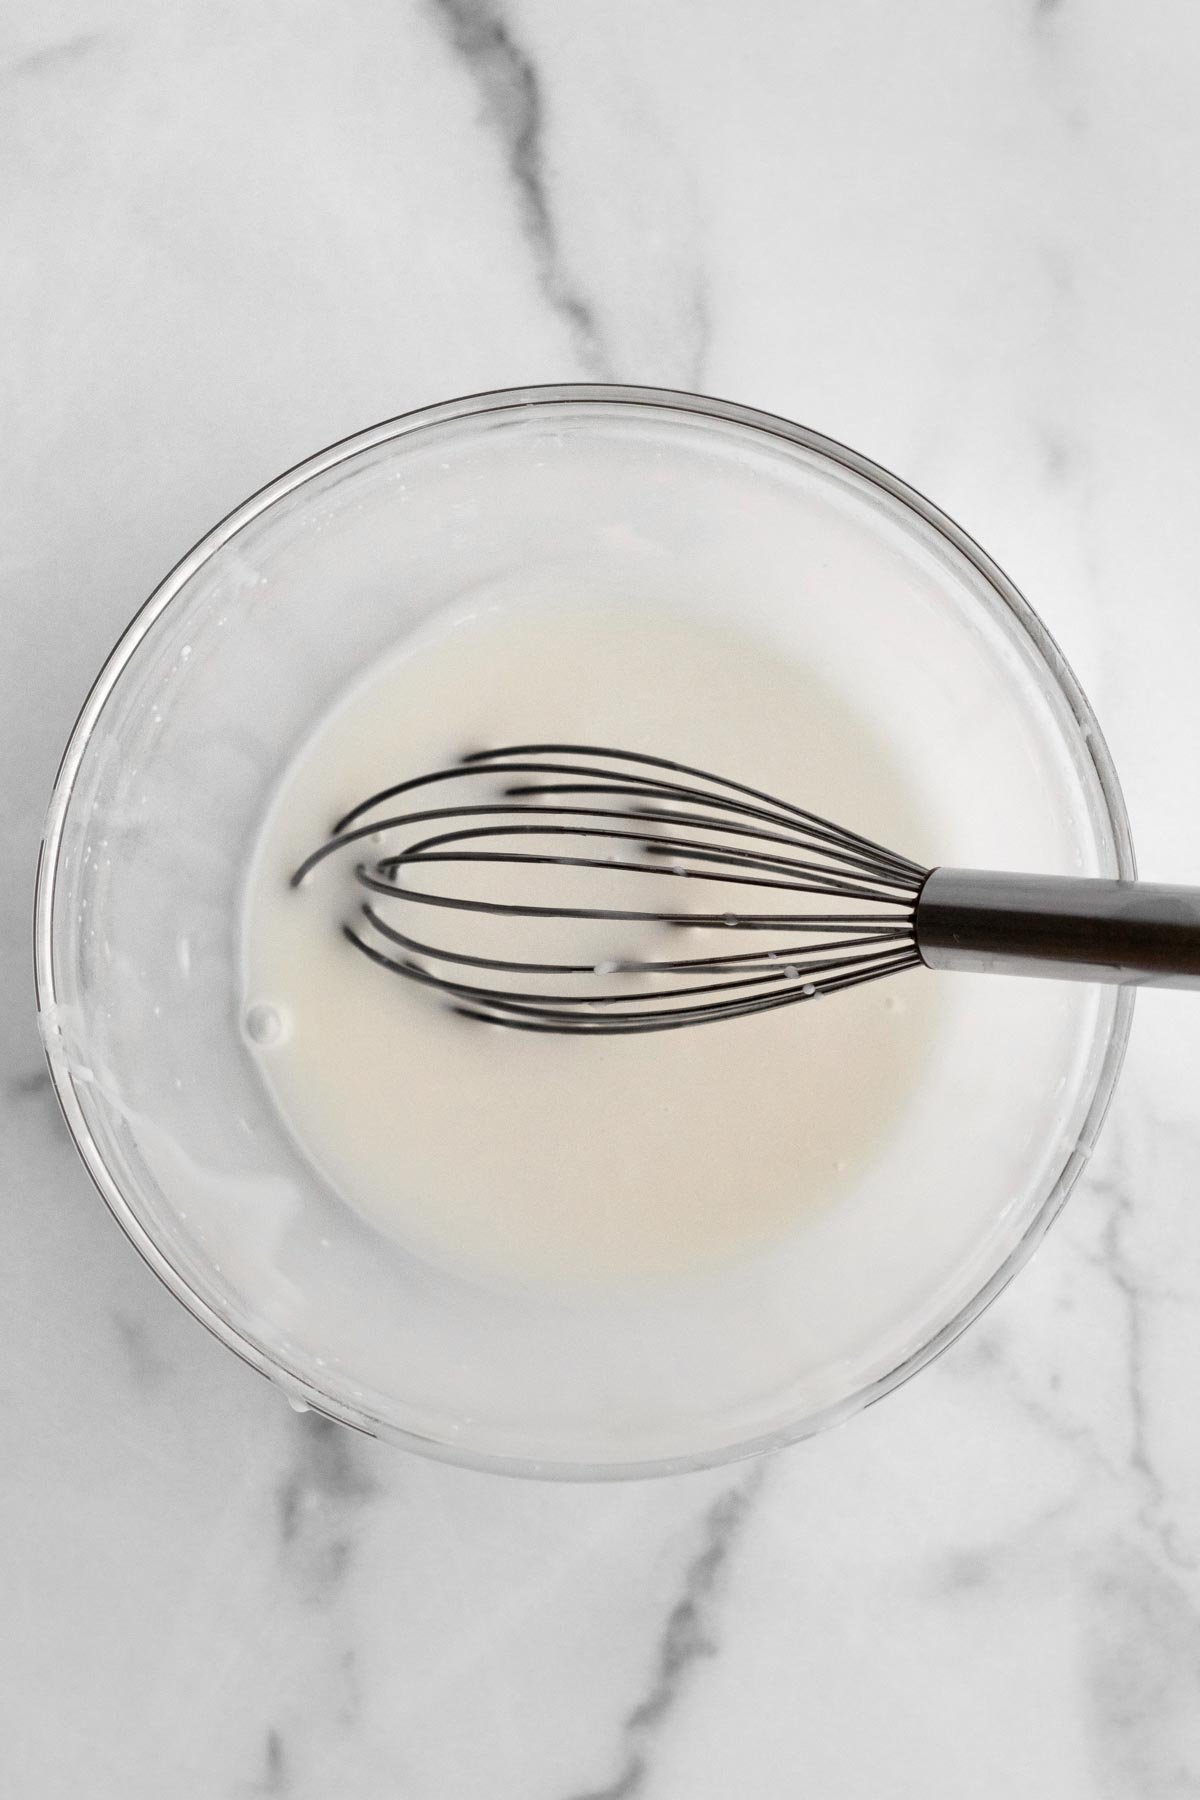 White chocolate drizzle with a whisk.